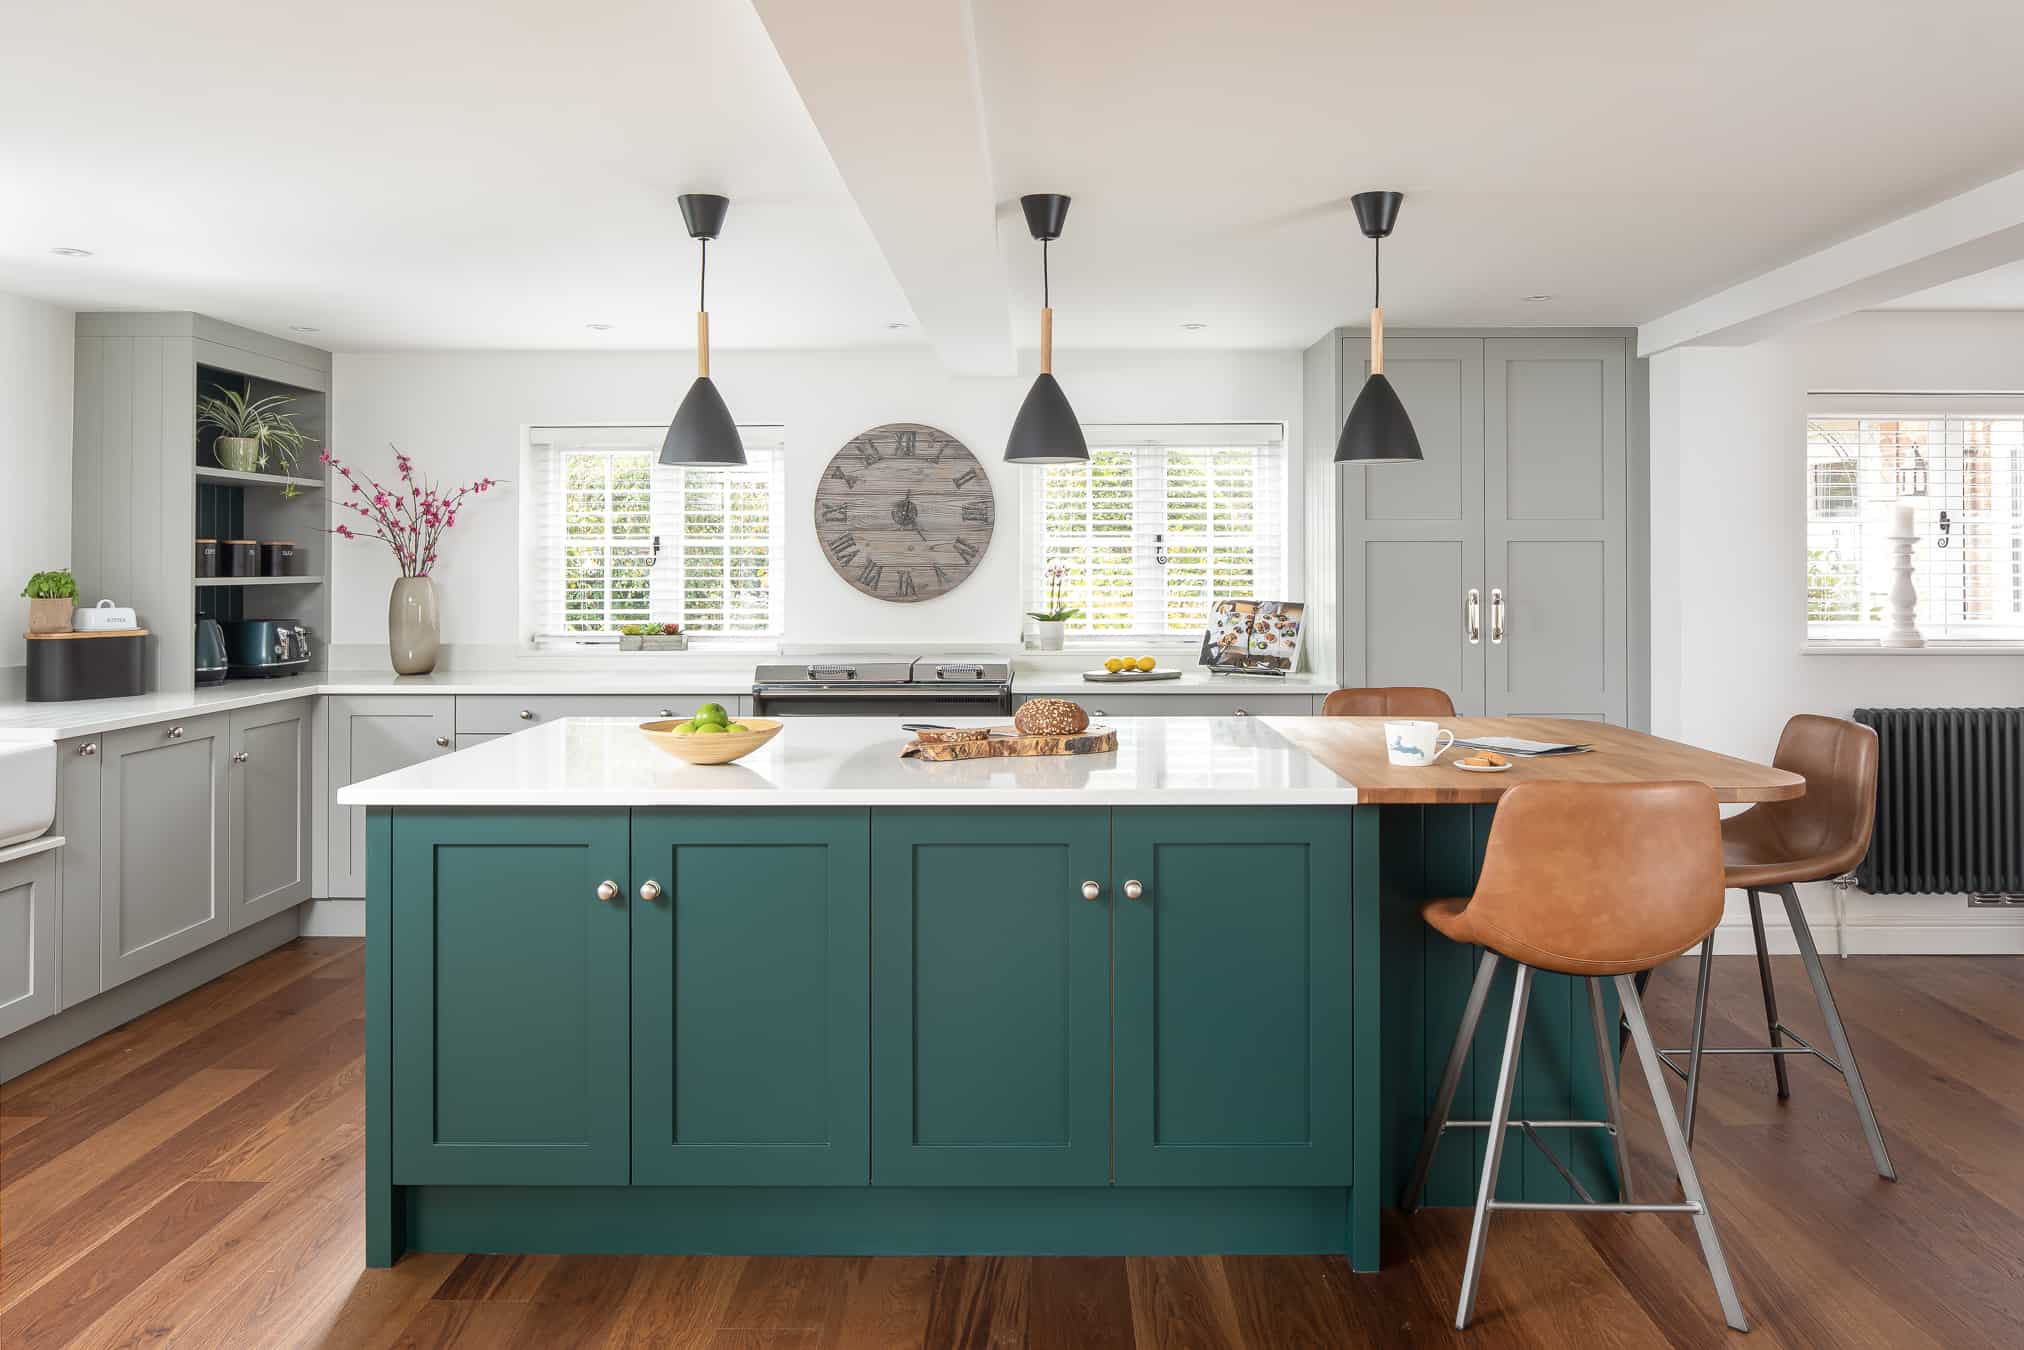 20 Colourful Kitchen Ideas   John Lewis of Hungerford